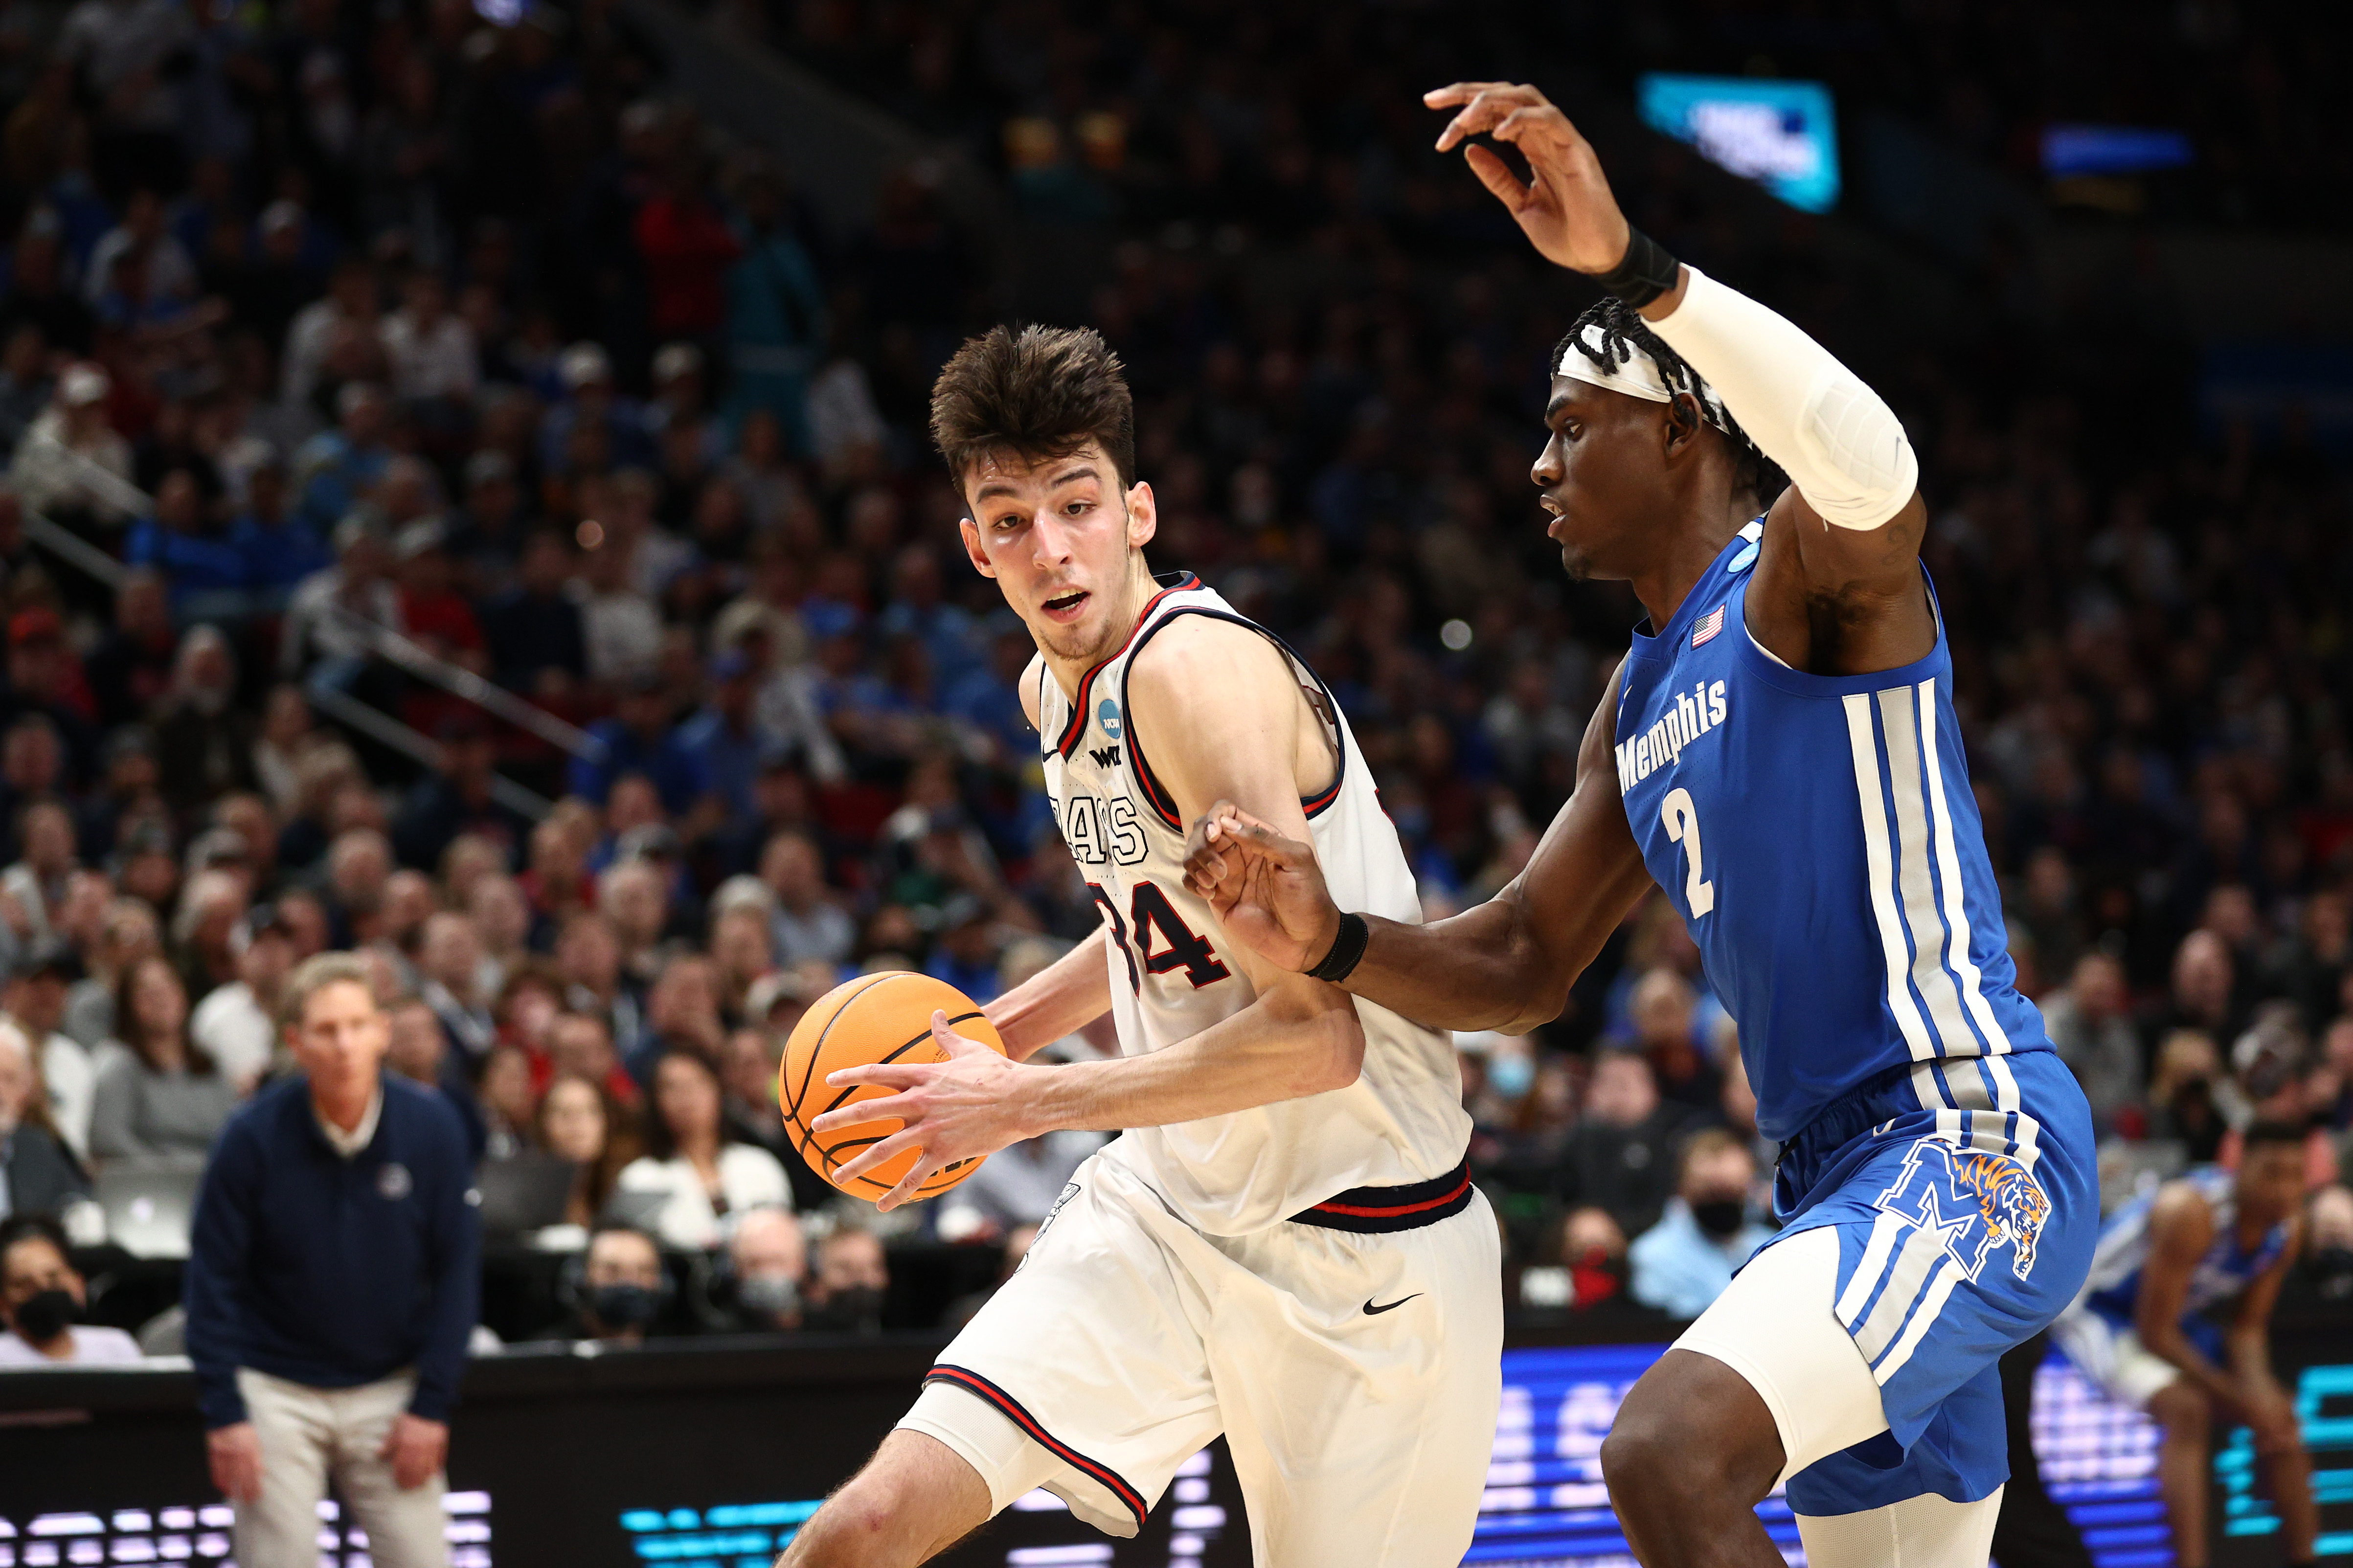 Chet Holmgren #34 of the Gonzaga Bulldogs drives passed Jalen Duren #2 of the Memphis Tigers during the second half in the second round of the 2022 NCAA Men’s Basketball Tournament at Moda Center on March 19, 2022 in Portland, Oregon.